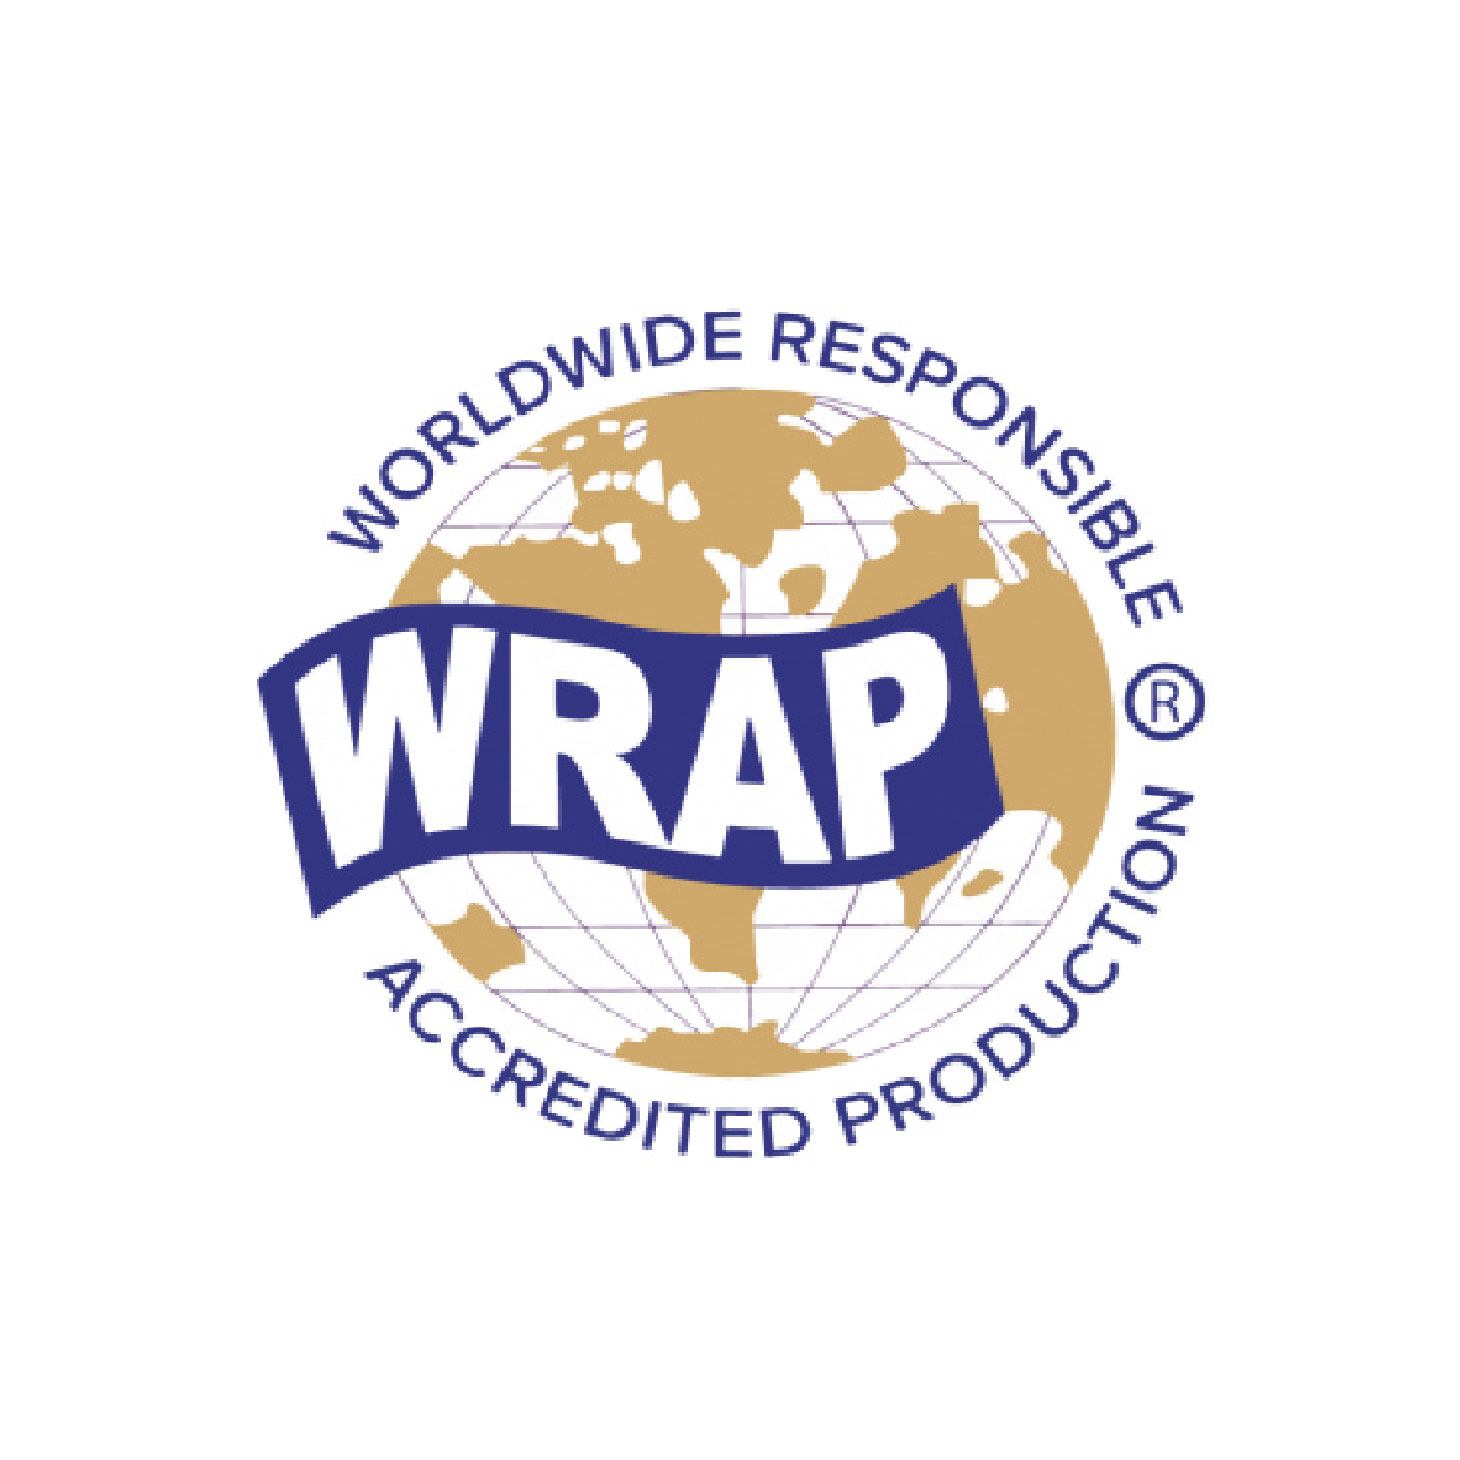 Worldwide Responsible Accredited Production - WRAP